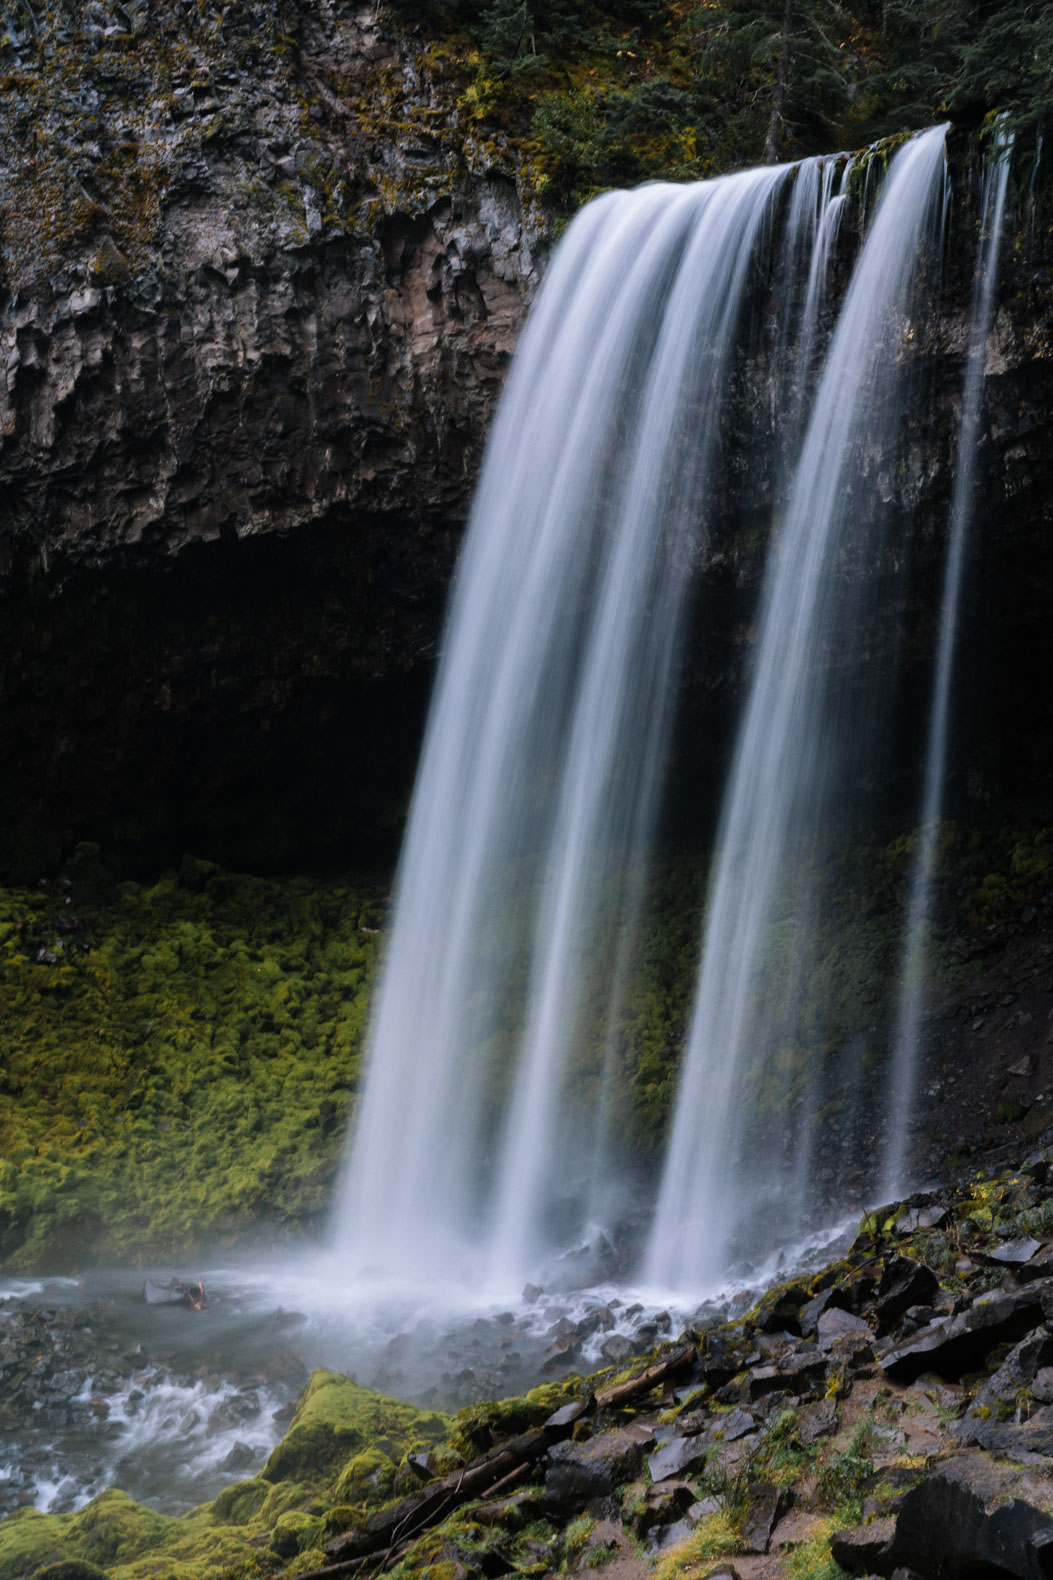 Photo of a waterfall taken with a tripod